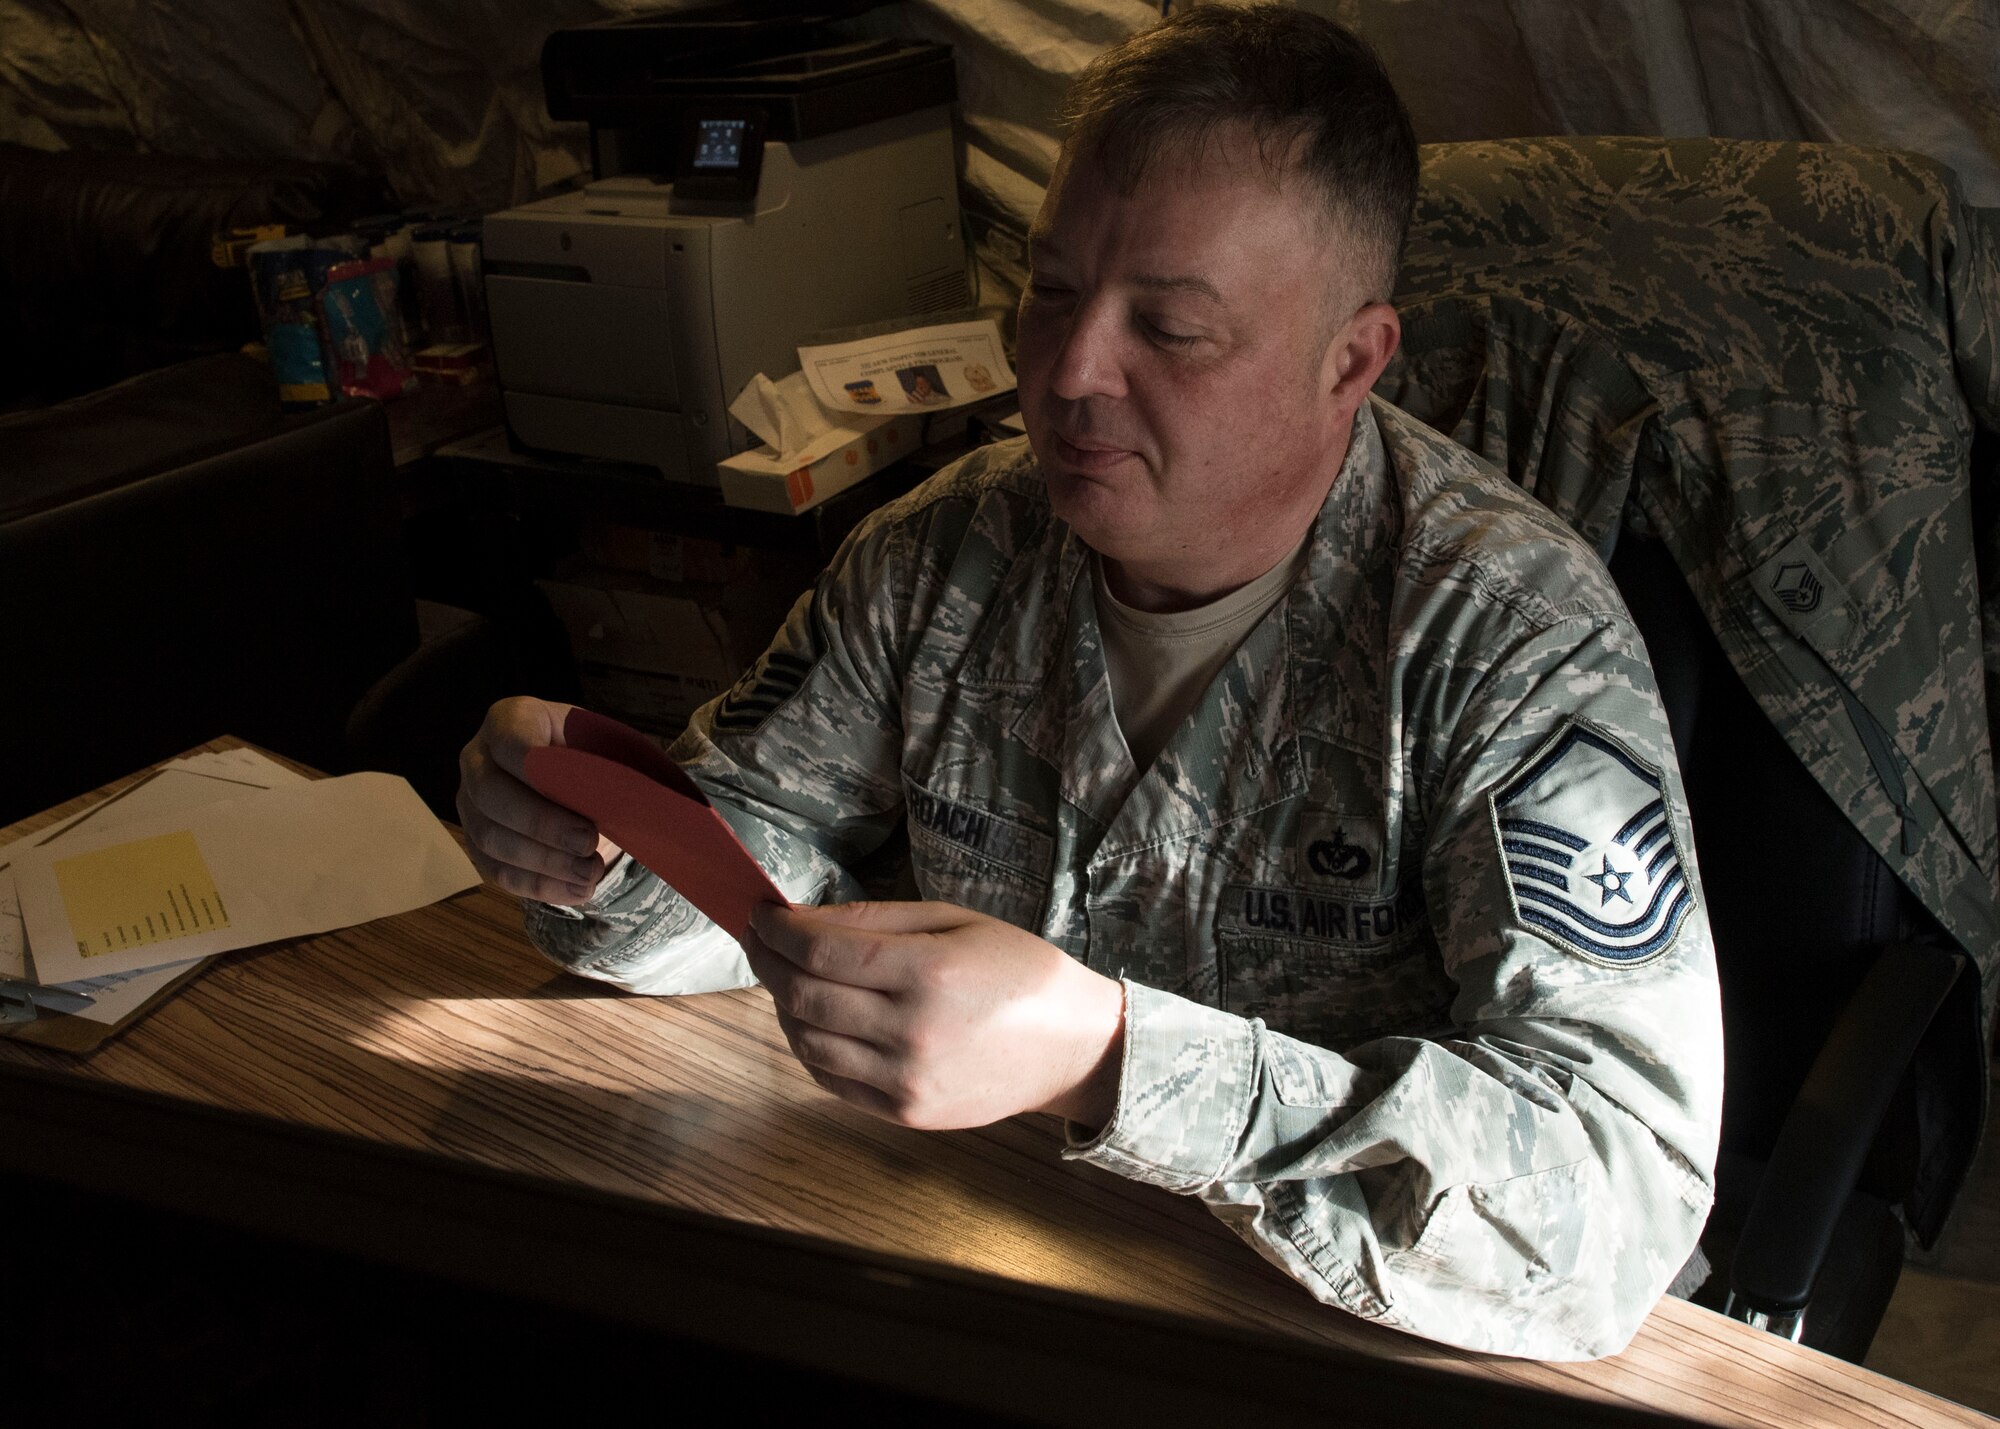 Master Sgt. Paul Roach, 332nd Expeditionary Civil Engineer Squadron assistant chief of training, reads a Valentine’s Day card, Feb. 14, 2017, in Southwest Asia. Students from Cape Cod, Massachusetts handcrafted cards for service members serving overseas. (U.S. Air Force photo by Staff Sgt. Eboni Reams)